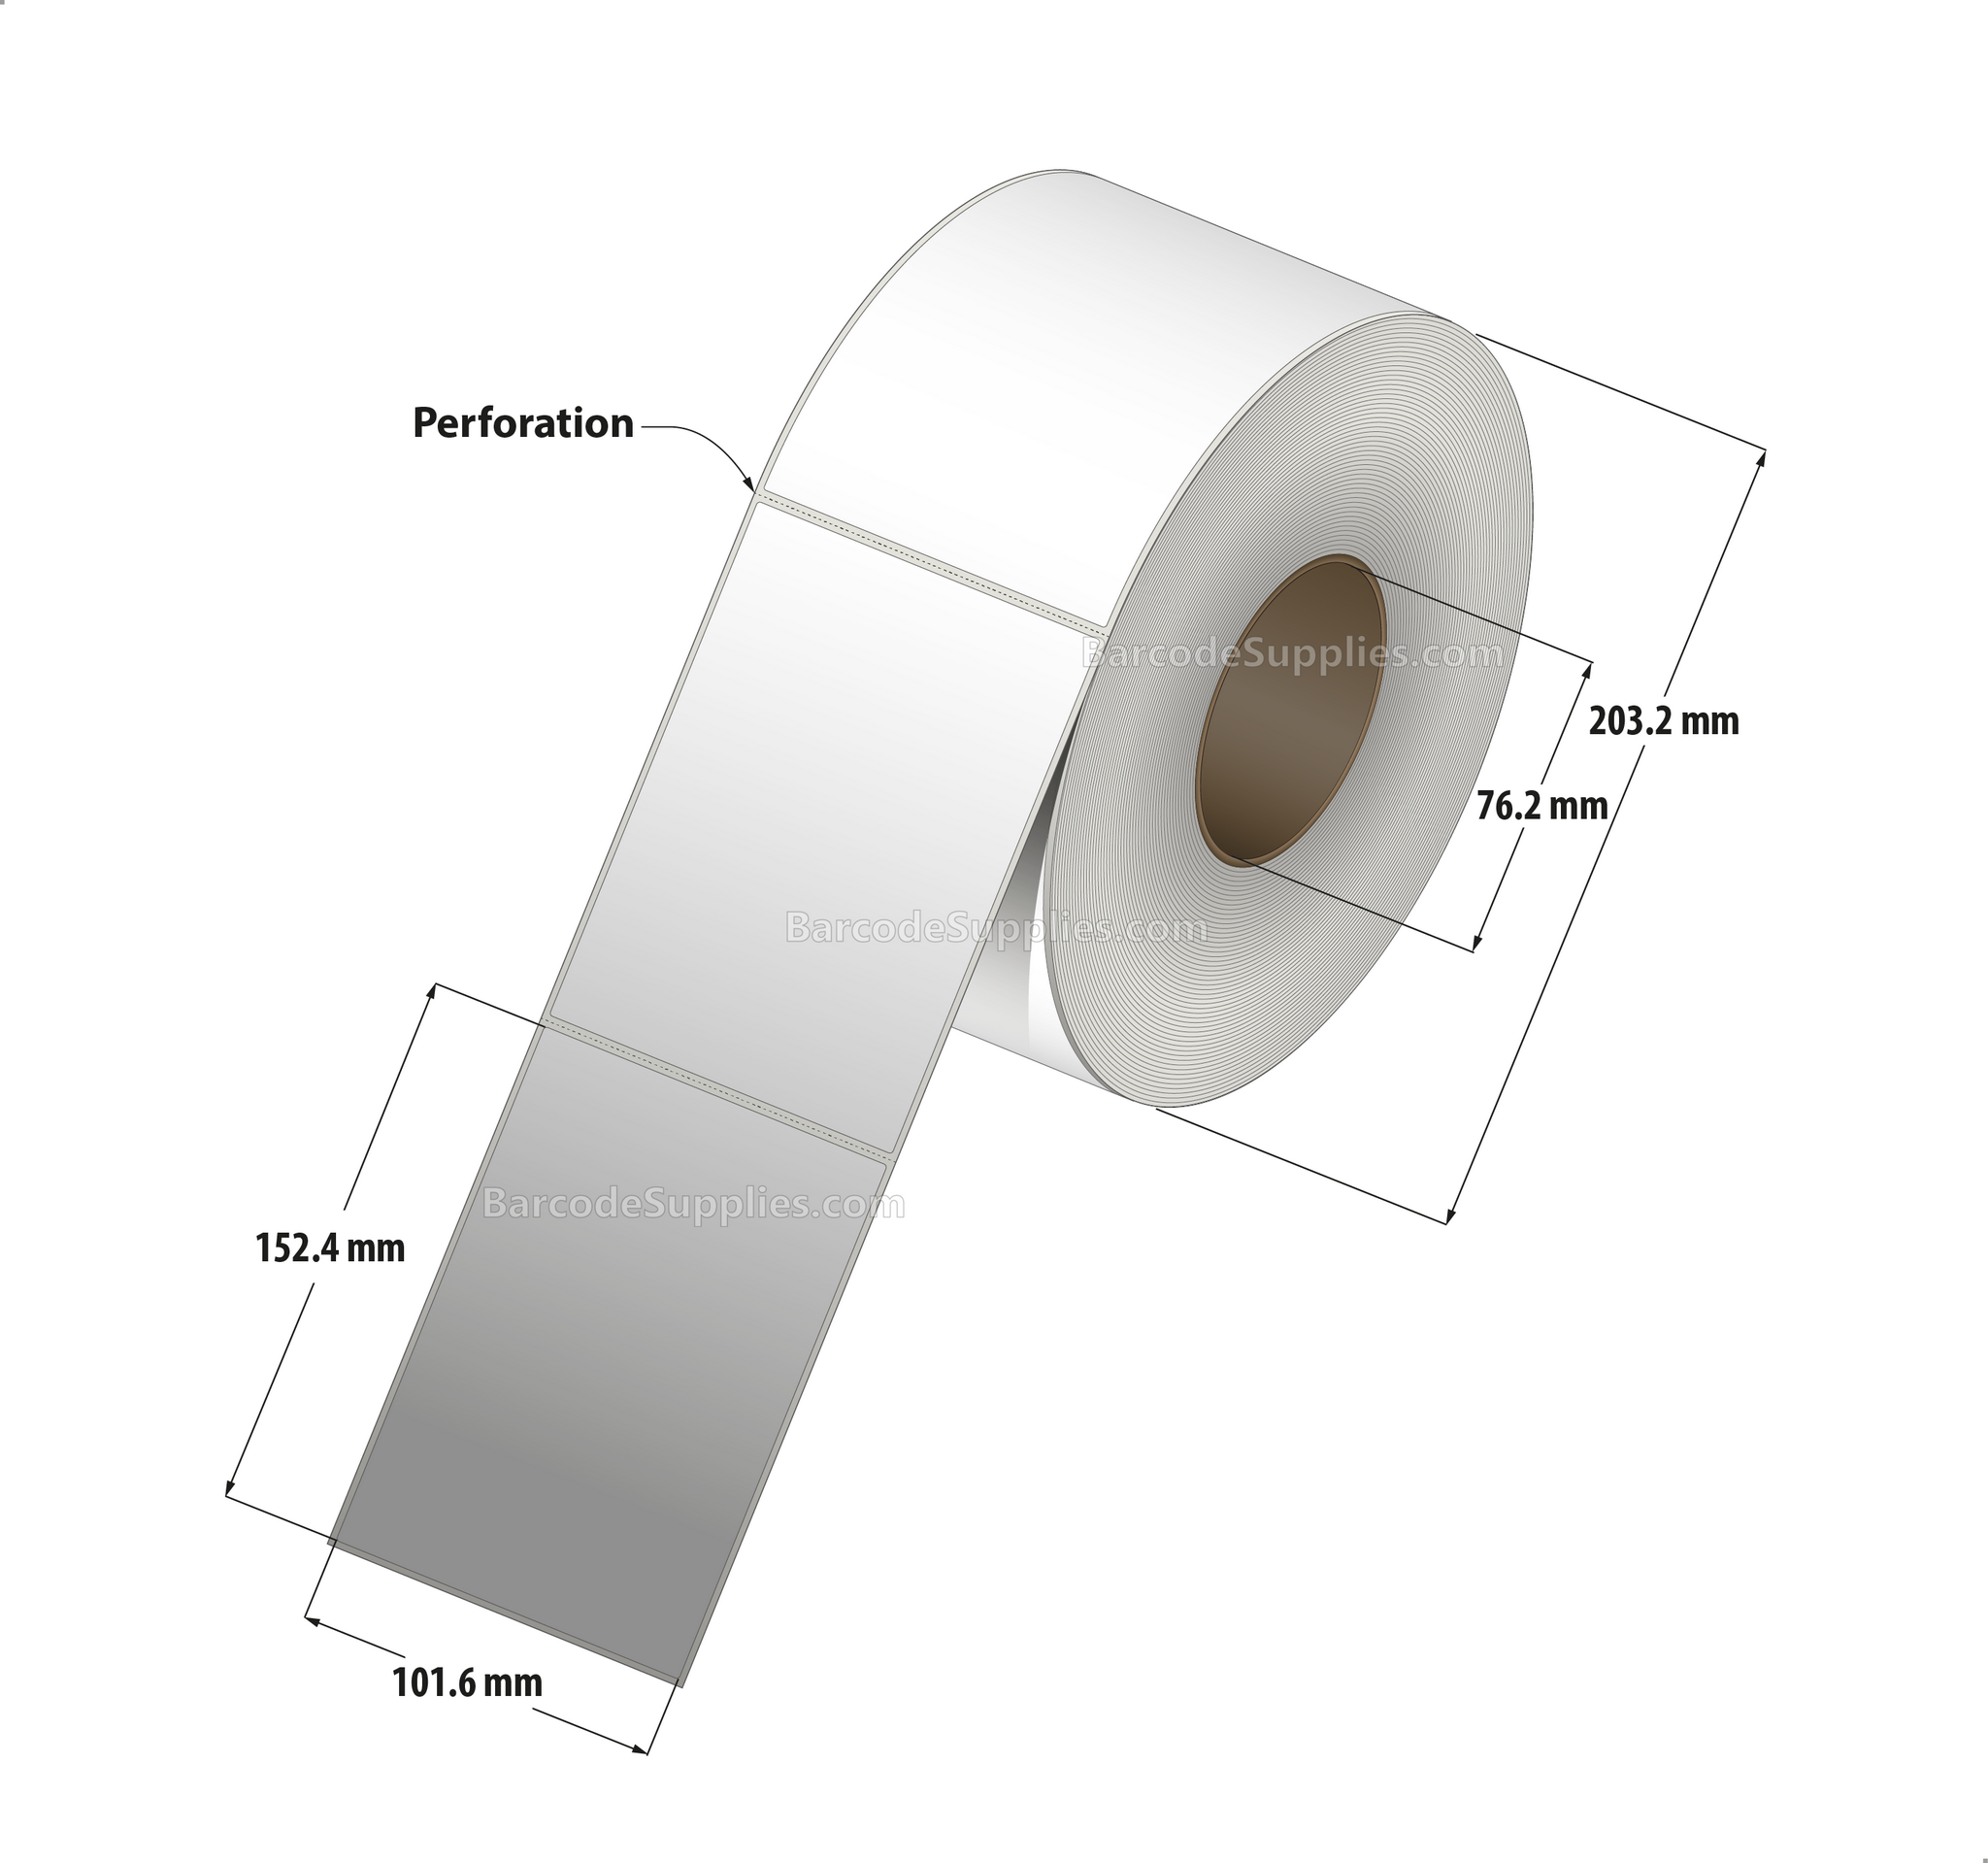 4 x 6 Thermal Transfer White Labels With Permanent Adhesive - Perforated - 1050 Labels Per Roll - Carton Of 4 Rolls - 4200 Labels Total - MPN: RP-4-6-1050-3